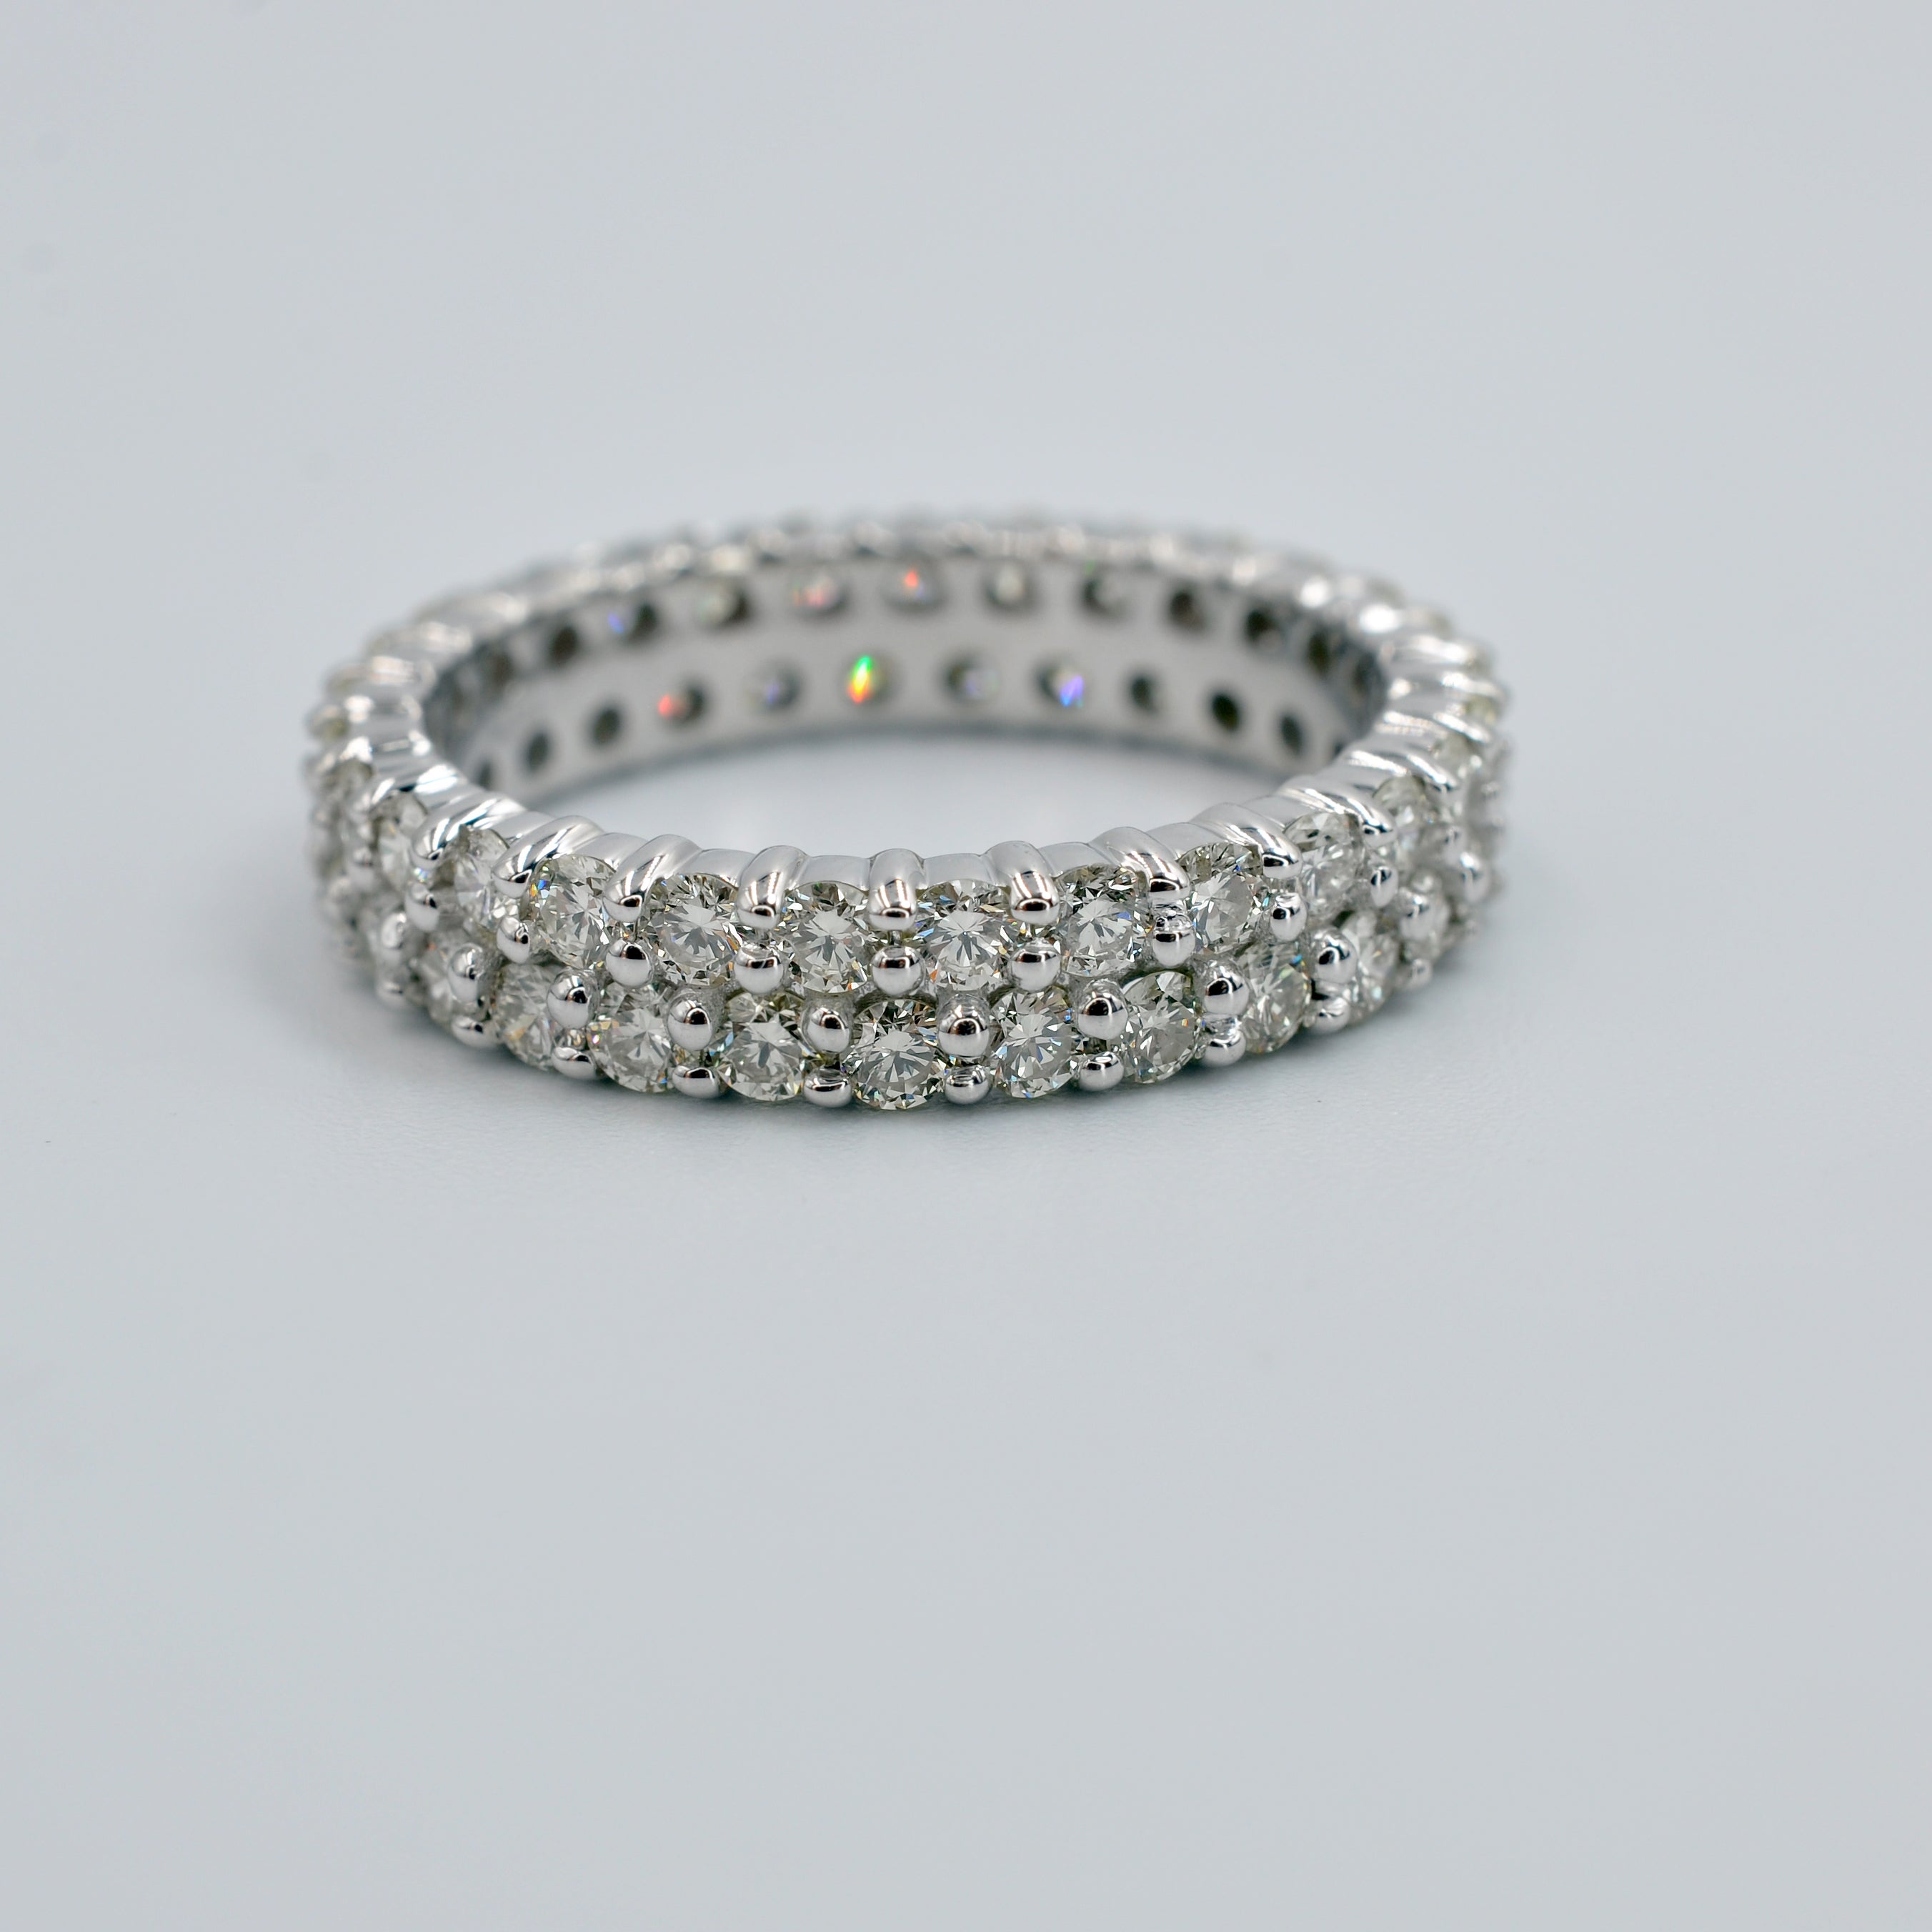 Chic 5.00 CT Round Cut Diamond Eternity Ring in 14KT White Gold